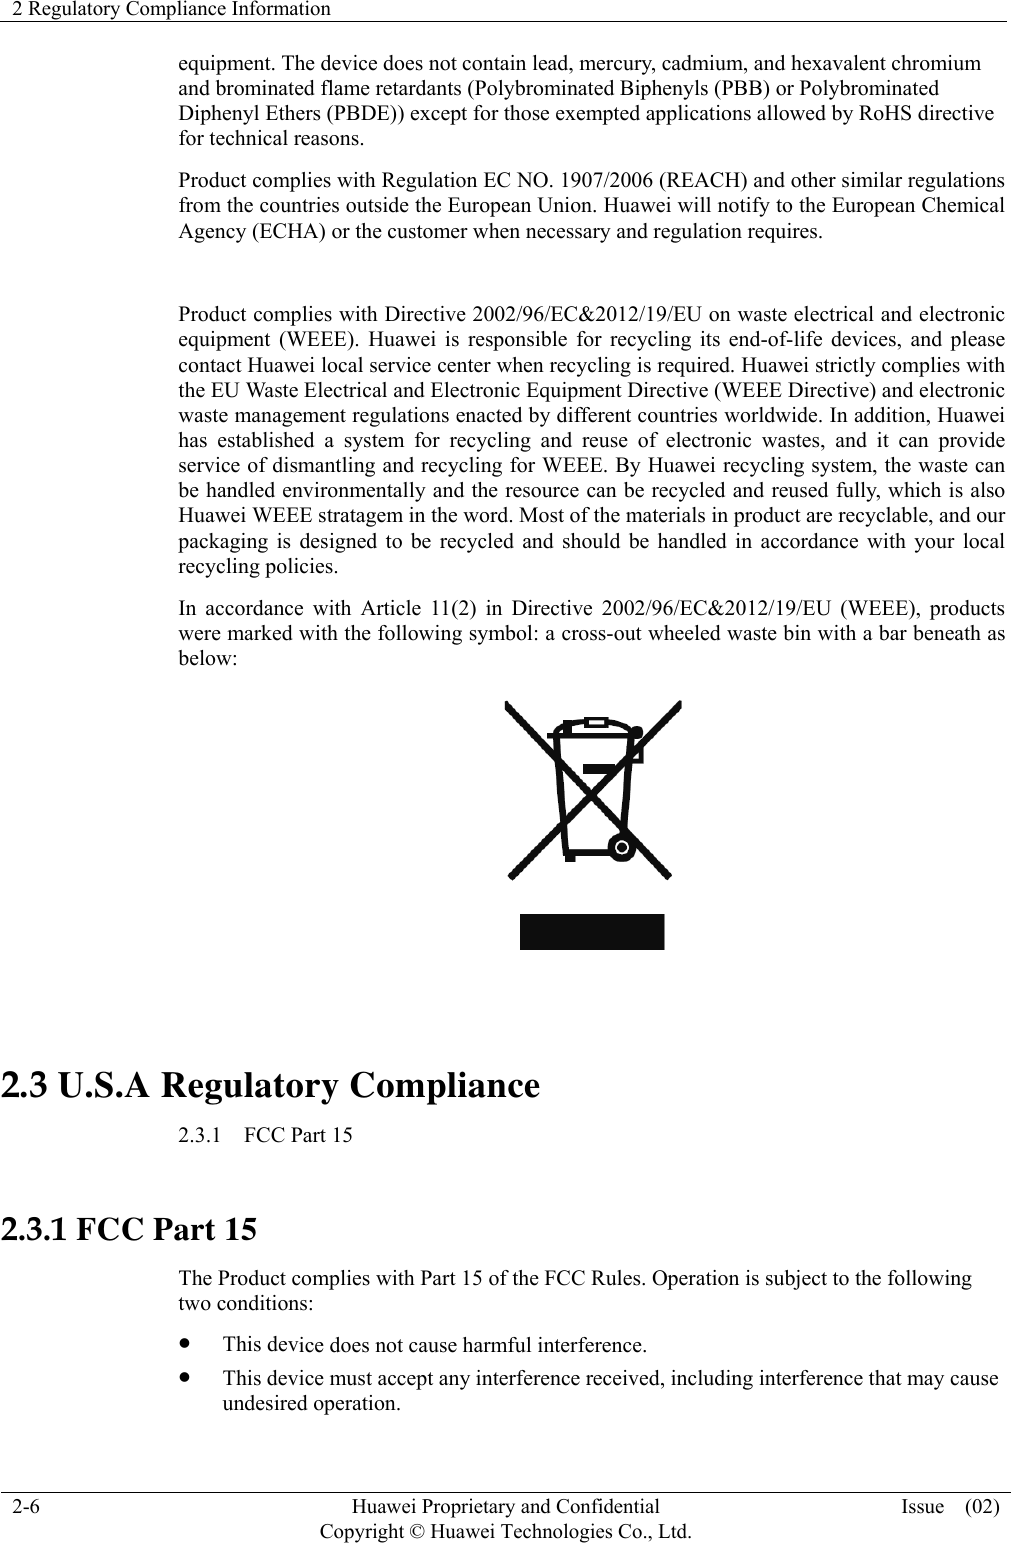 2 Regulatory Compliance Information  2-6  Huawei Proprietary and Confidential         Copyright © Huawei Technologies Co., Ltd.Issue  (02) equipment. The device does not contain lead, mercury, cadmium, and hexavalent chromium and brominated flame retardants (Polybrominated Biphenyls (PBB) or Polybrominated Diphenyl Ethers (PBDE)) except for those exempted applications allowed by RoHS directive for technical reasons.   Product complies with Regulation EC NO. 1907/2006 (REACH) and other similar regulations from the countries outside the European Union. Huawei will notify to the European Chemical Agency (ECHA) or the customer when necessary and regulation requires.  Product complies with Directive 2002/96/EC&amp;2012/19/EU on waste electrical and electronic equipment (WEEE). Huawei is responsible for recycling its end-of-life devices, and please contact Huawei local service center when recycling is required. Huawei strictly complies with the EU Waste Electrical and Electronic Equipment Directive (WEEE Directive) and electronic waste management regulations enacted by different countries worldwide. In addition, Huawei has established a system for recycling and reuse of electronic wastes, and it can provide service of dismantling and recycling for WEEE. By Huawei recycling system, the waste can be handled environmentally and the resource can be recycled and reused fully, which is also Huawei WEEE stratagem in the word. Most of the materials in product are recyclable, and our packaging is designed to be recycled and should be handled in accordance with your local recycling policies.   In accordance with Article 11(2) in Directive 2002/96/EC&amp;2012/19/EU (WEEE), products were marked with the following symbol: a cross-out wheeled waste bin with a bar beneath as below:   2.3 U.S.A Regulatory Compliance 2.3.1  FCC Part 15  2.3.1 FCC Part 15 The Product complies with Part 15 of the FCC Rules. Operation is subject to the following two conditions: z This device does not cause harmful interference. z This device must accept any interference received, including interference that may cause undesired operation. 